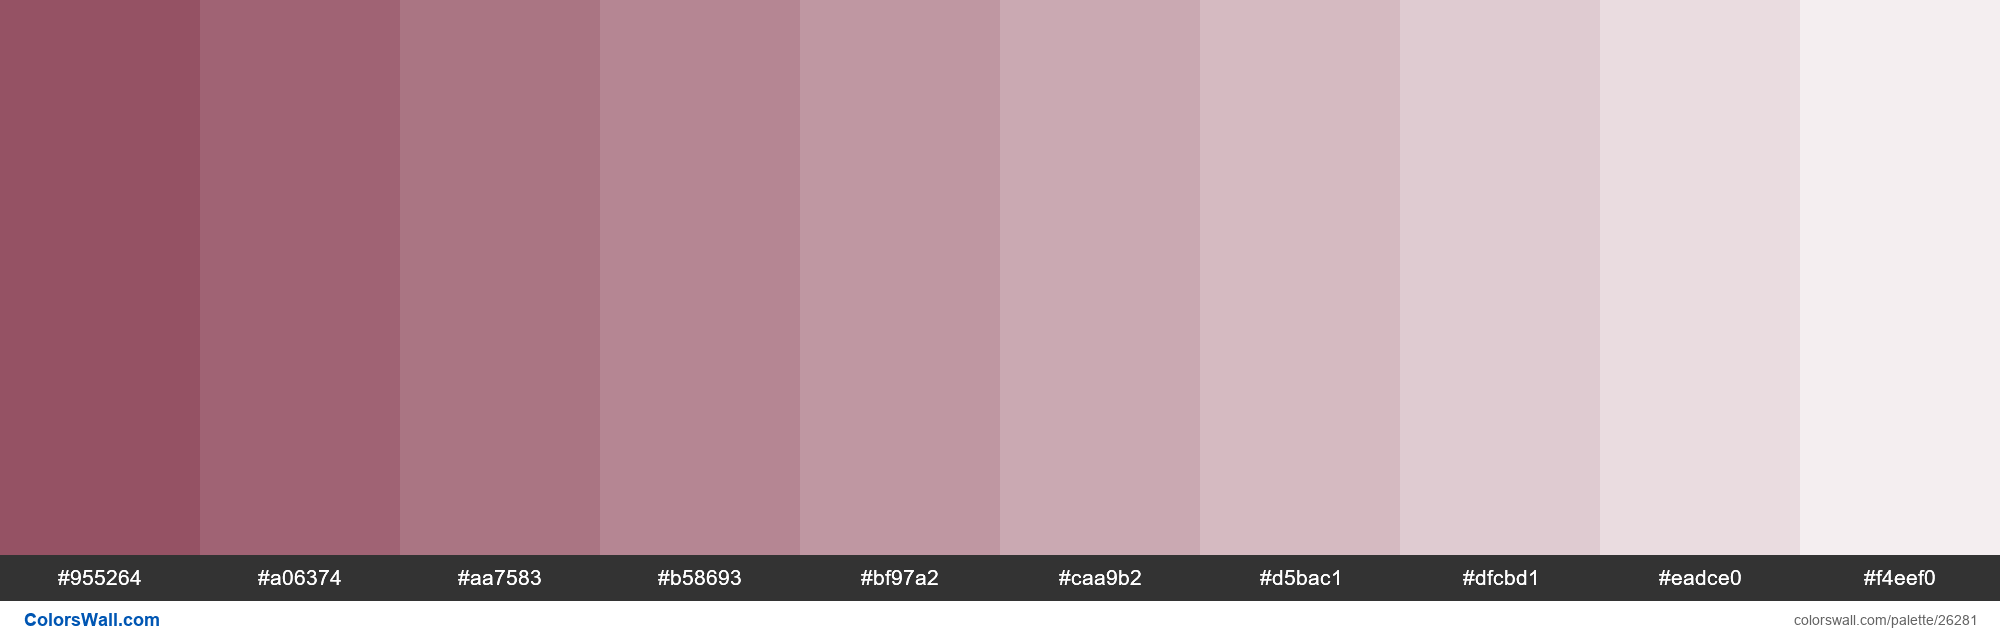 Tints of Vin Rouge color #955264 hex | ColorsWall